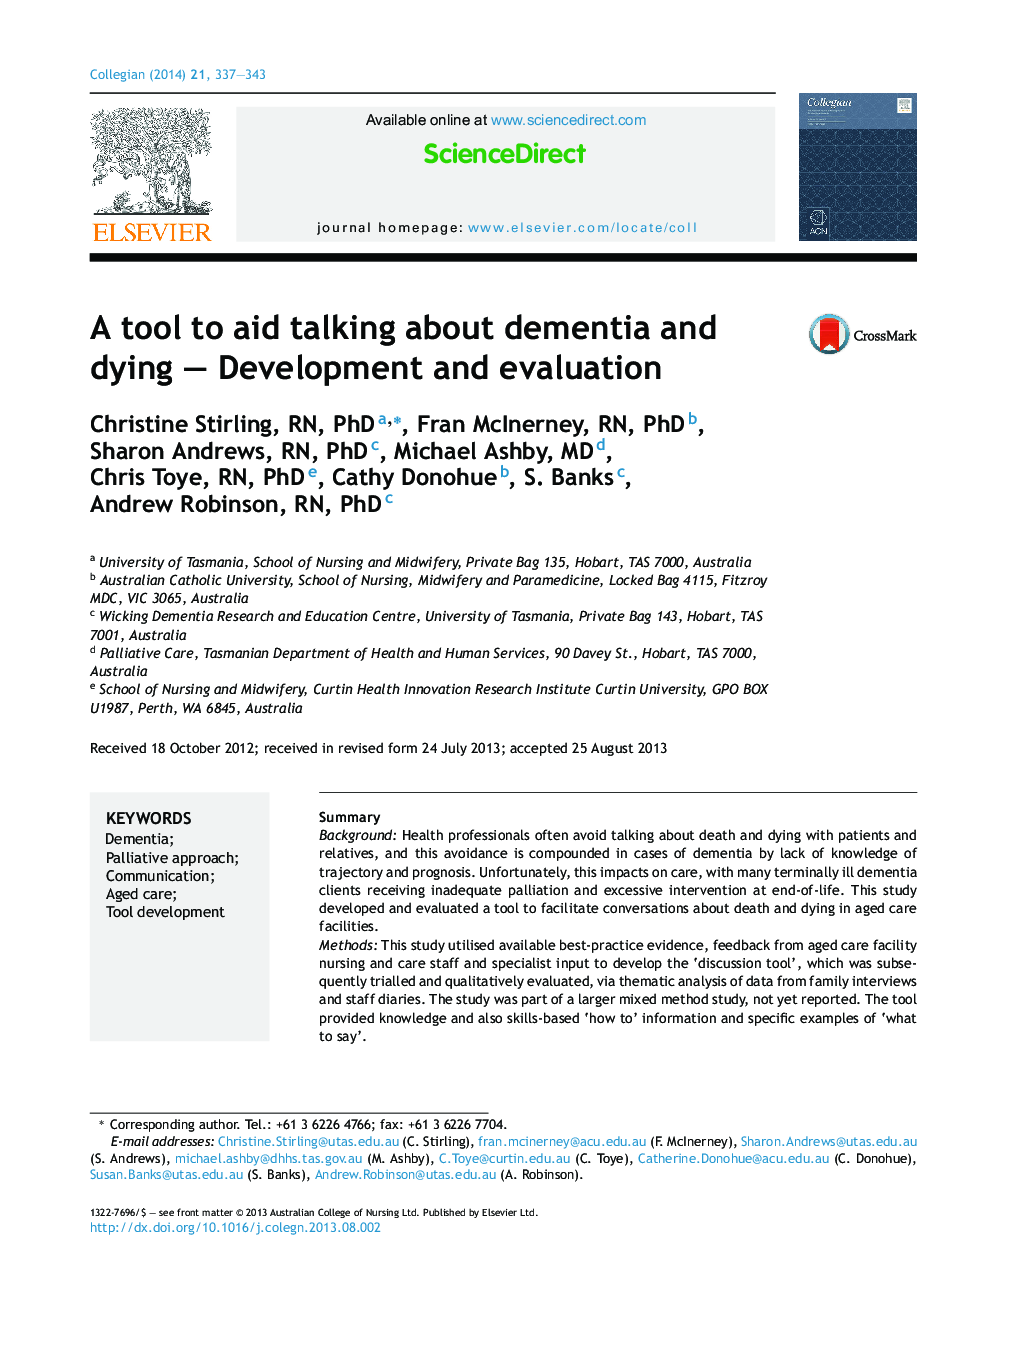 A tool to aid talking about dementia and dying – Development and evaluation